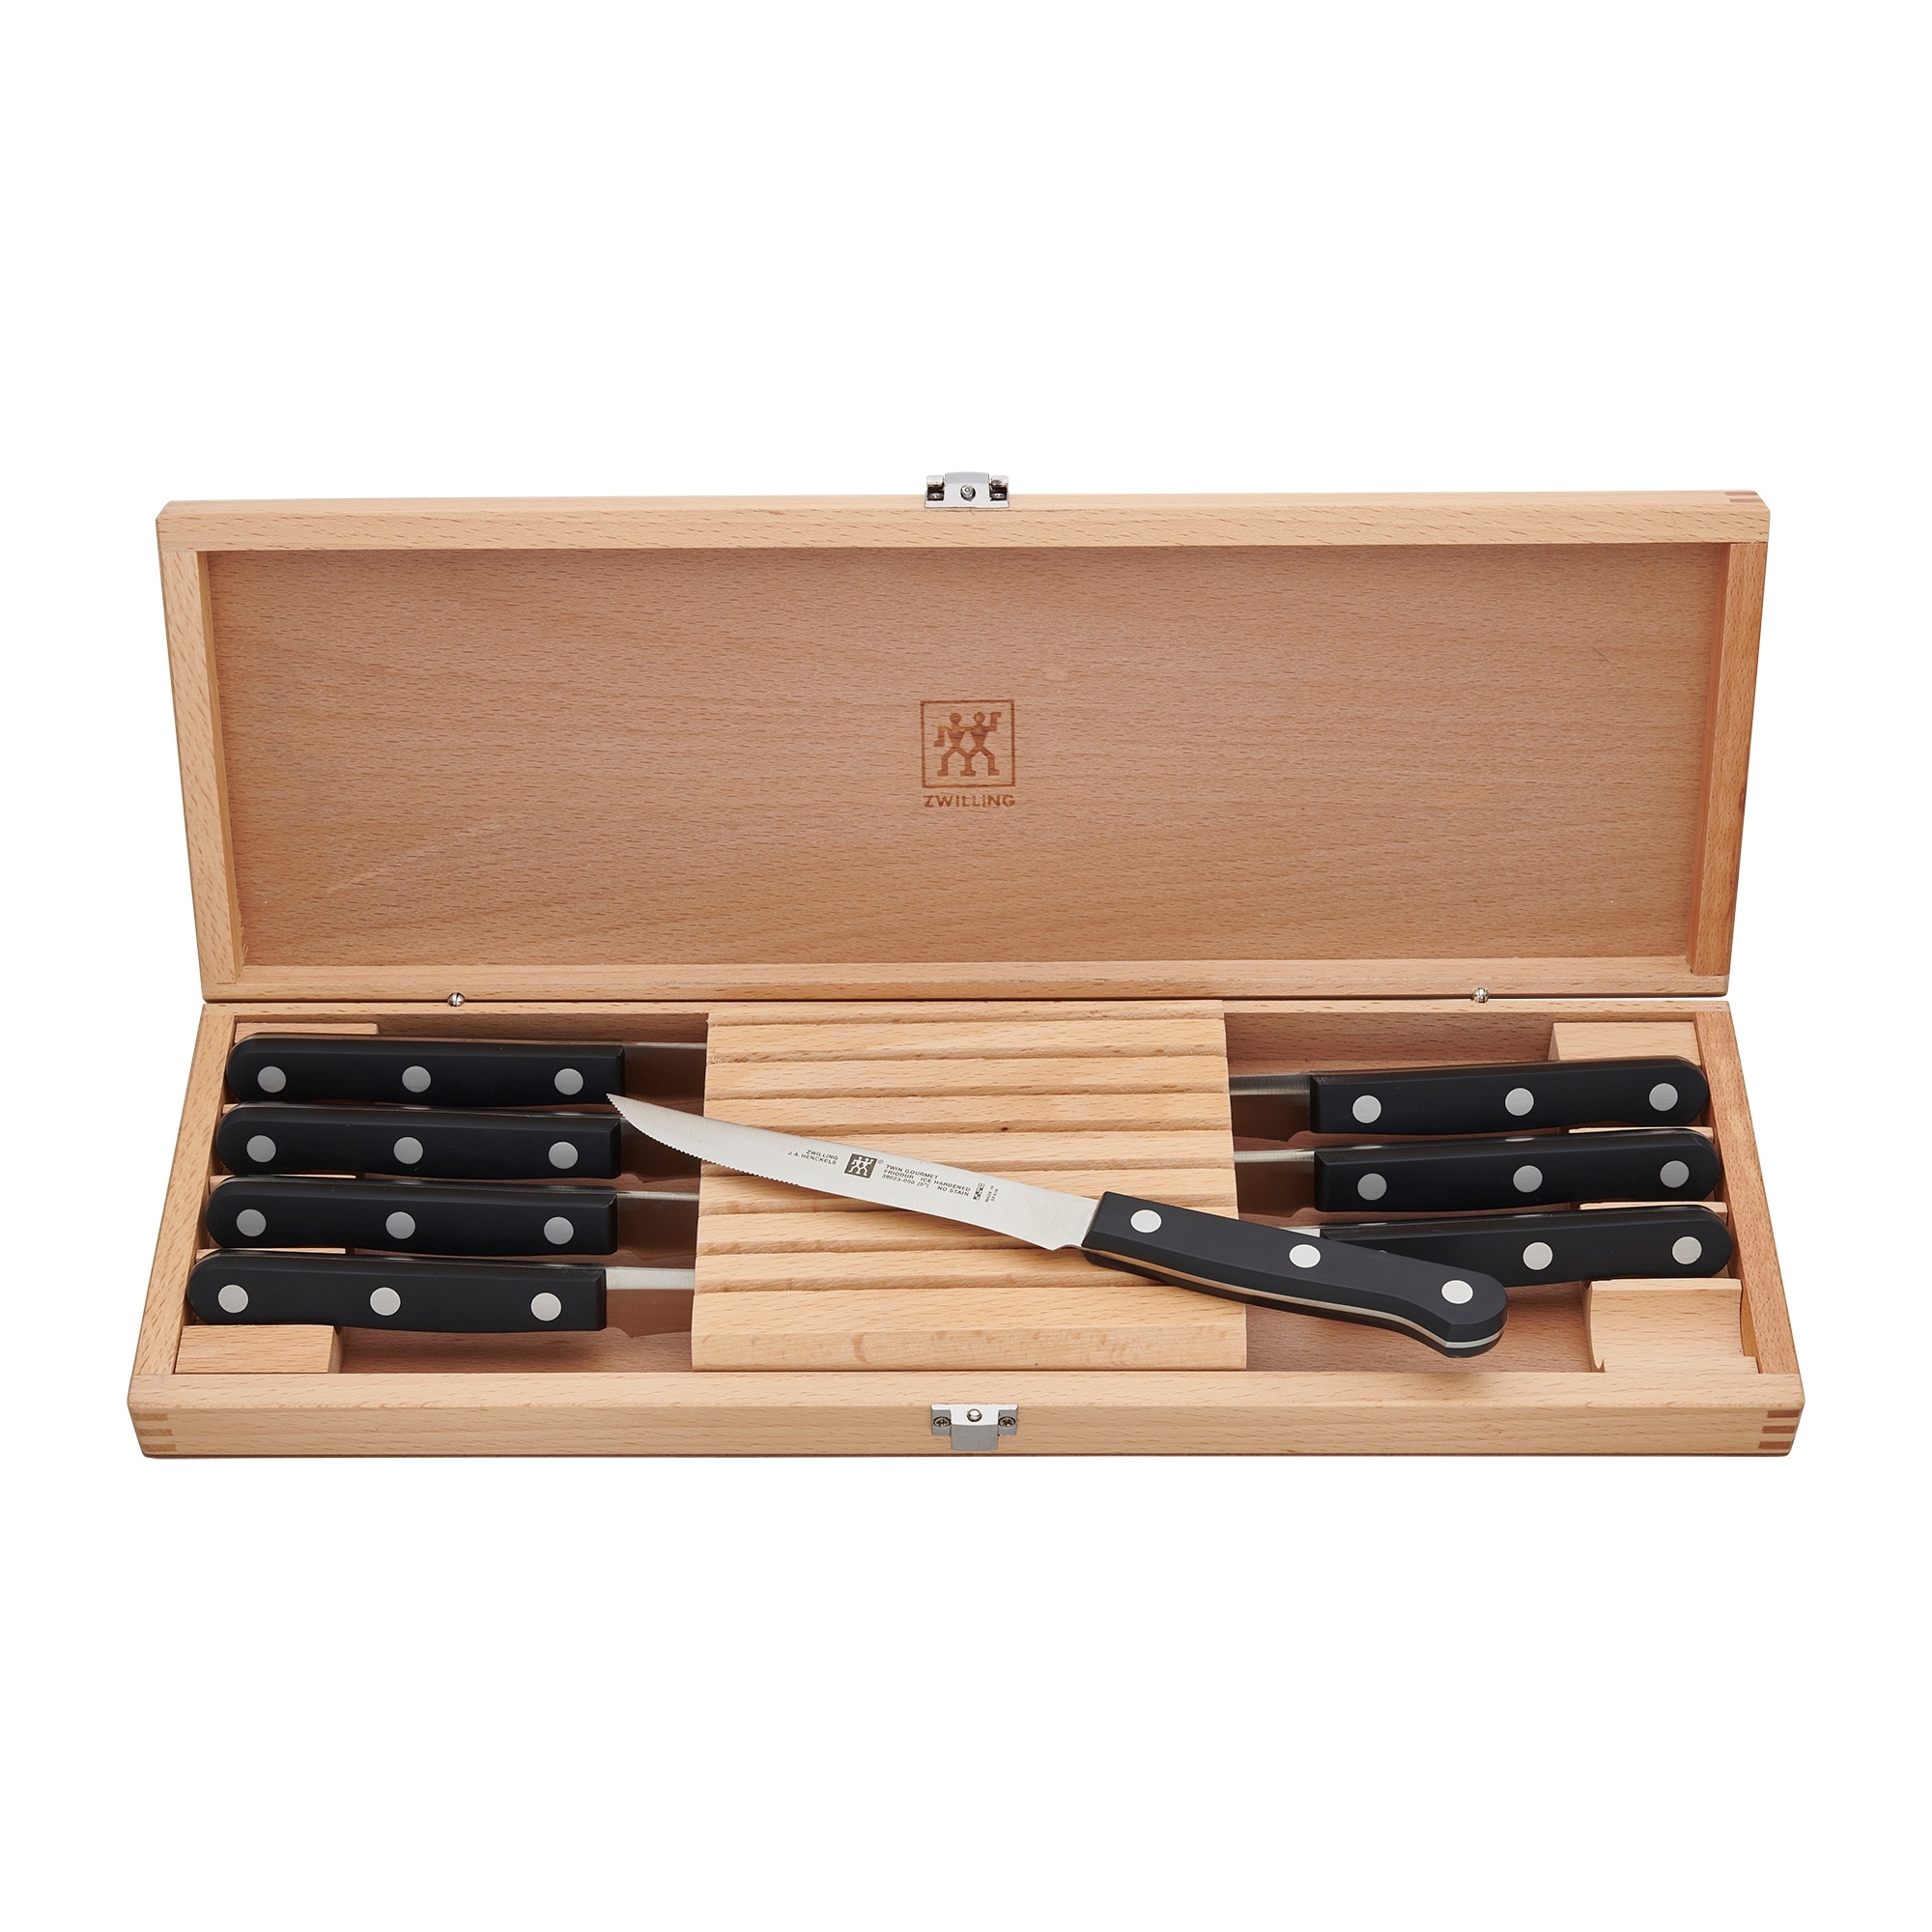 https://ak1.ostkcdn.com/images/products/is/images/direct/3e68acc49ec6c17eadf5d76c33d65100c6e2b950/ZWILLING-TWIN-Gourmet-Classic-8-pc-Steak-Knife-Set-with-Wood-Case.jpg